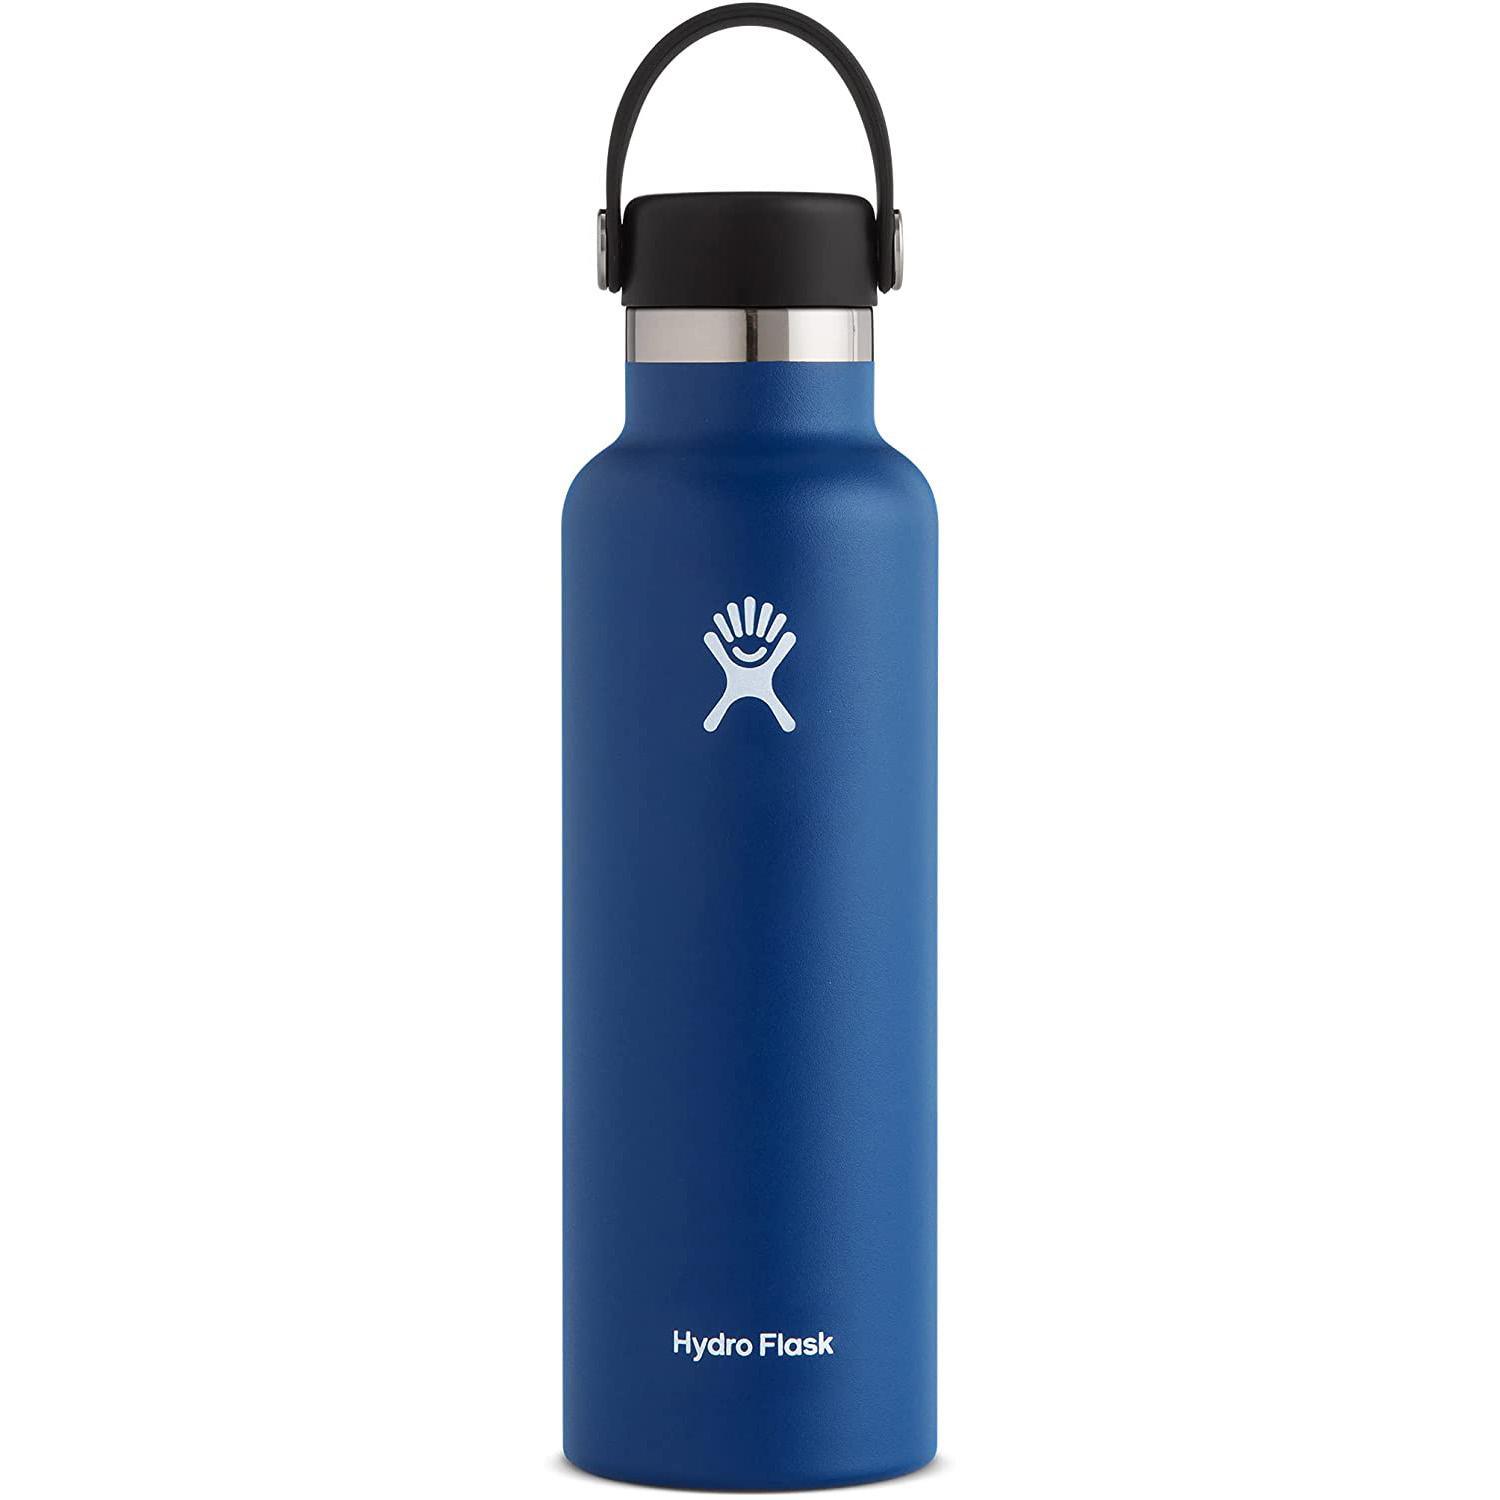 21oz Hydro Flask Stainless Steel Vacuum Insulated Bottle for $20.97